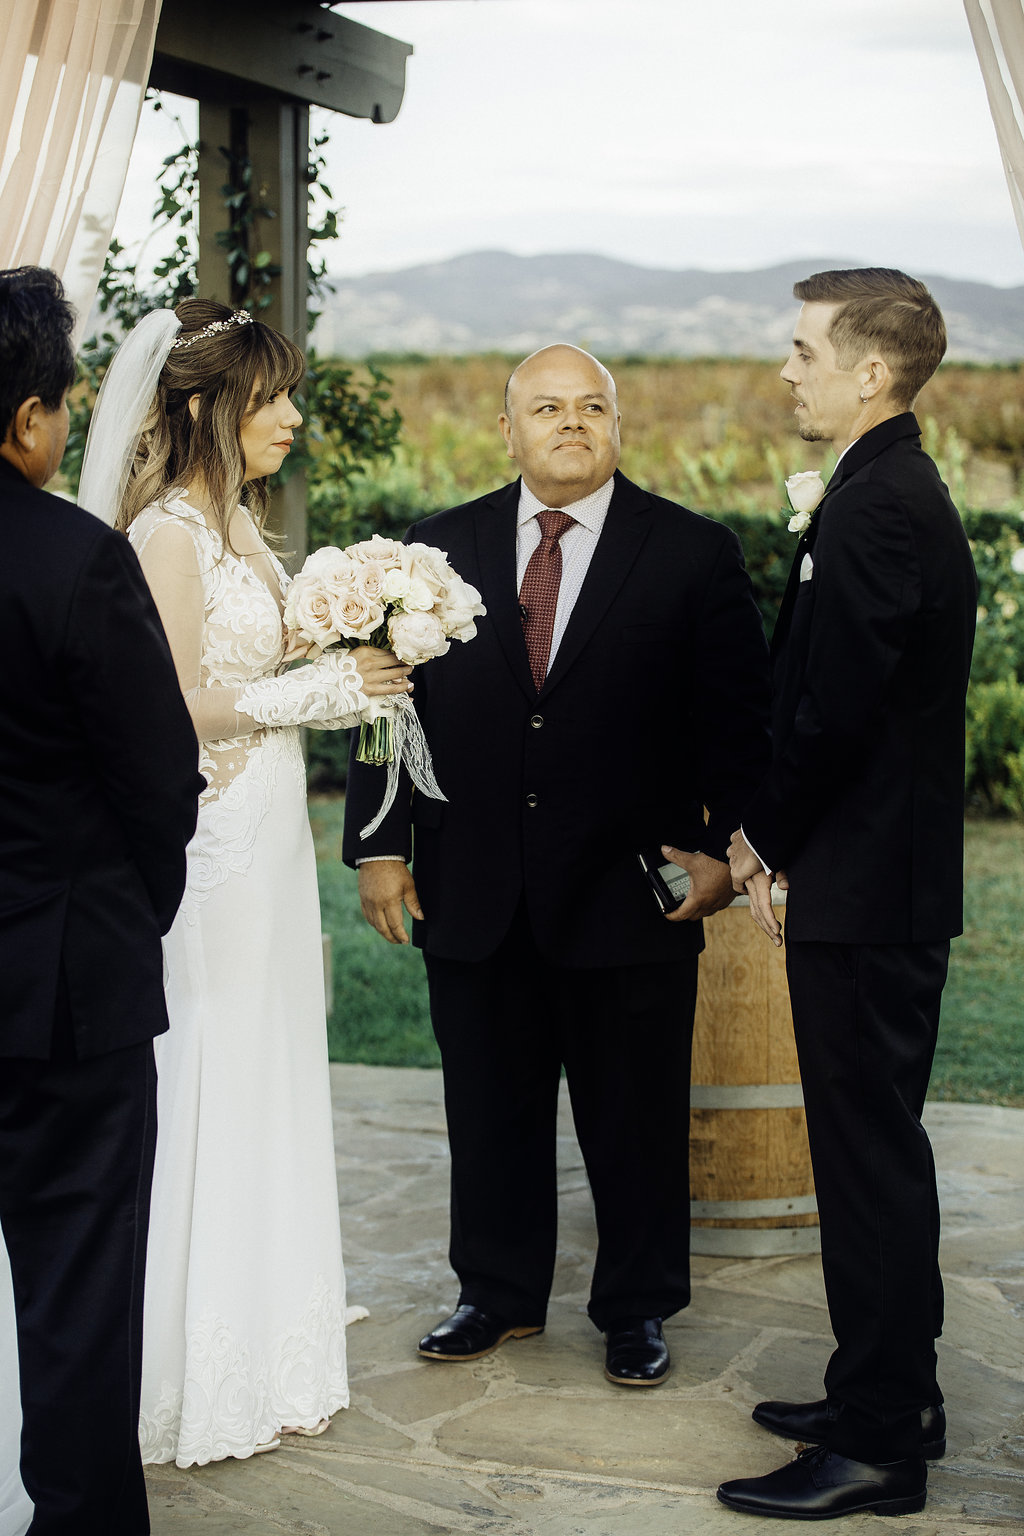 Wedding Photograph Of Two Men in Black Suit And Bride Carrying a Bouquet Los Angeles